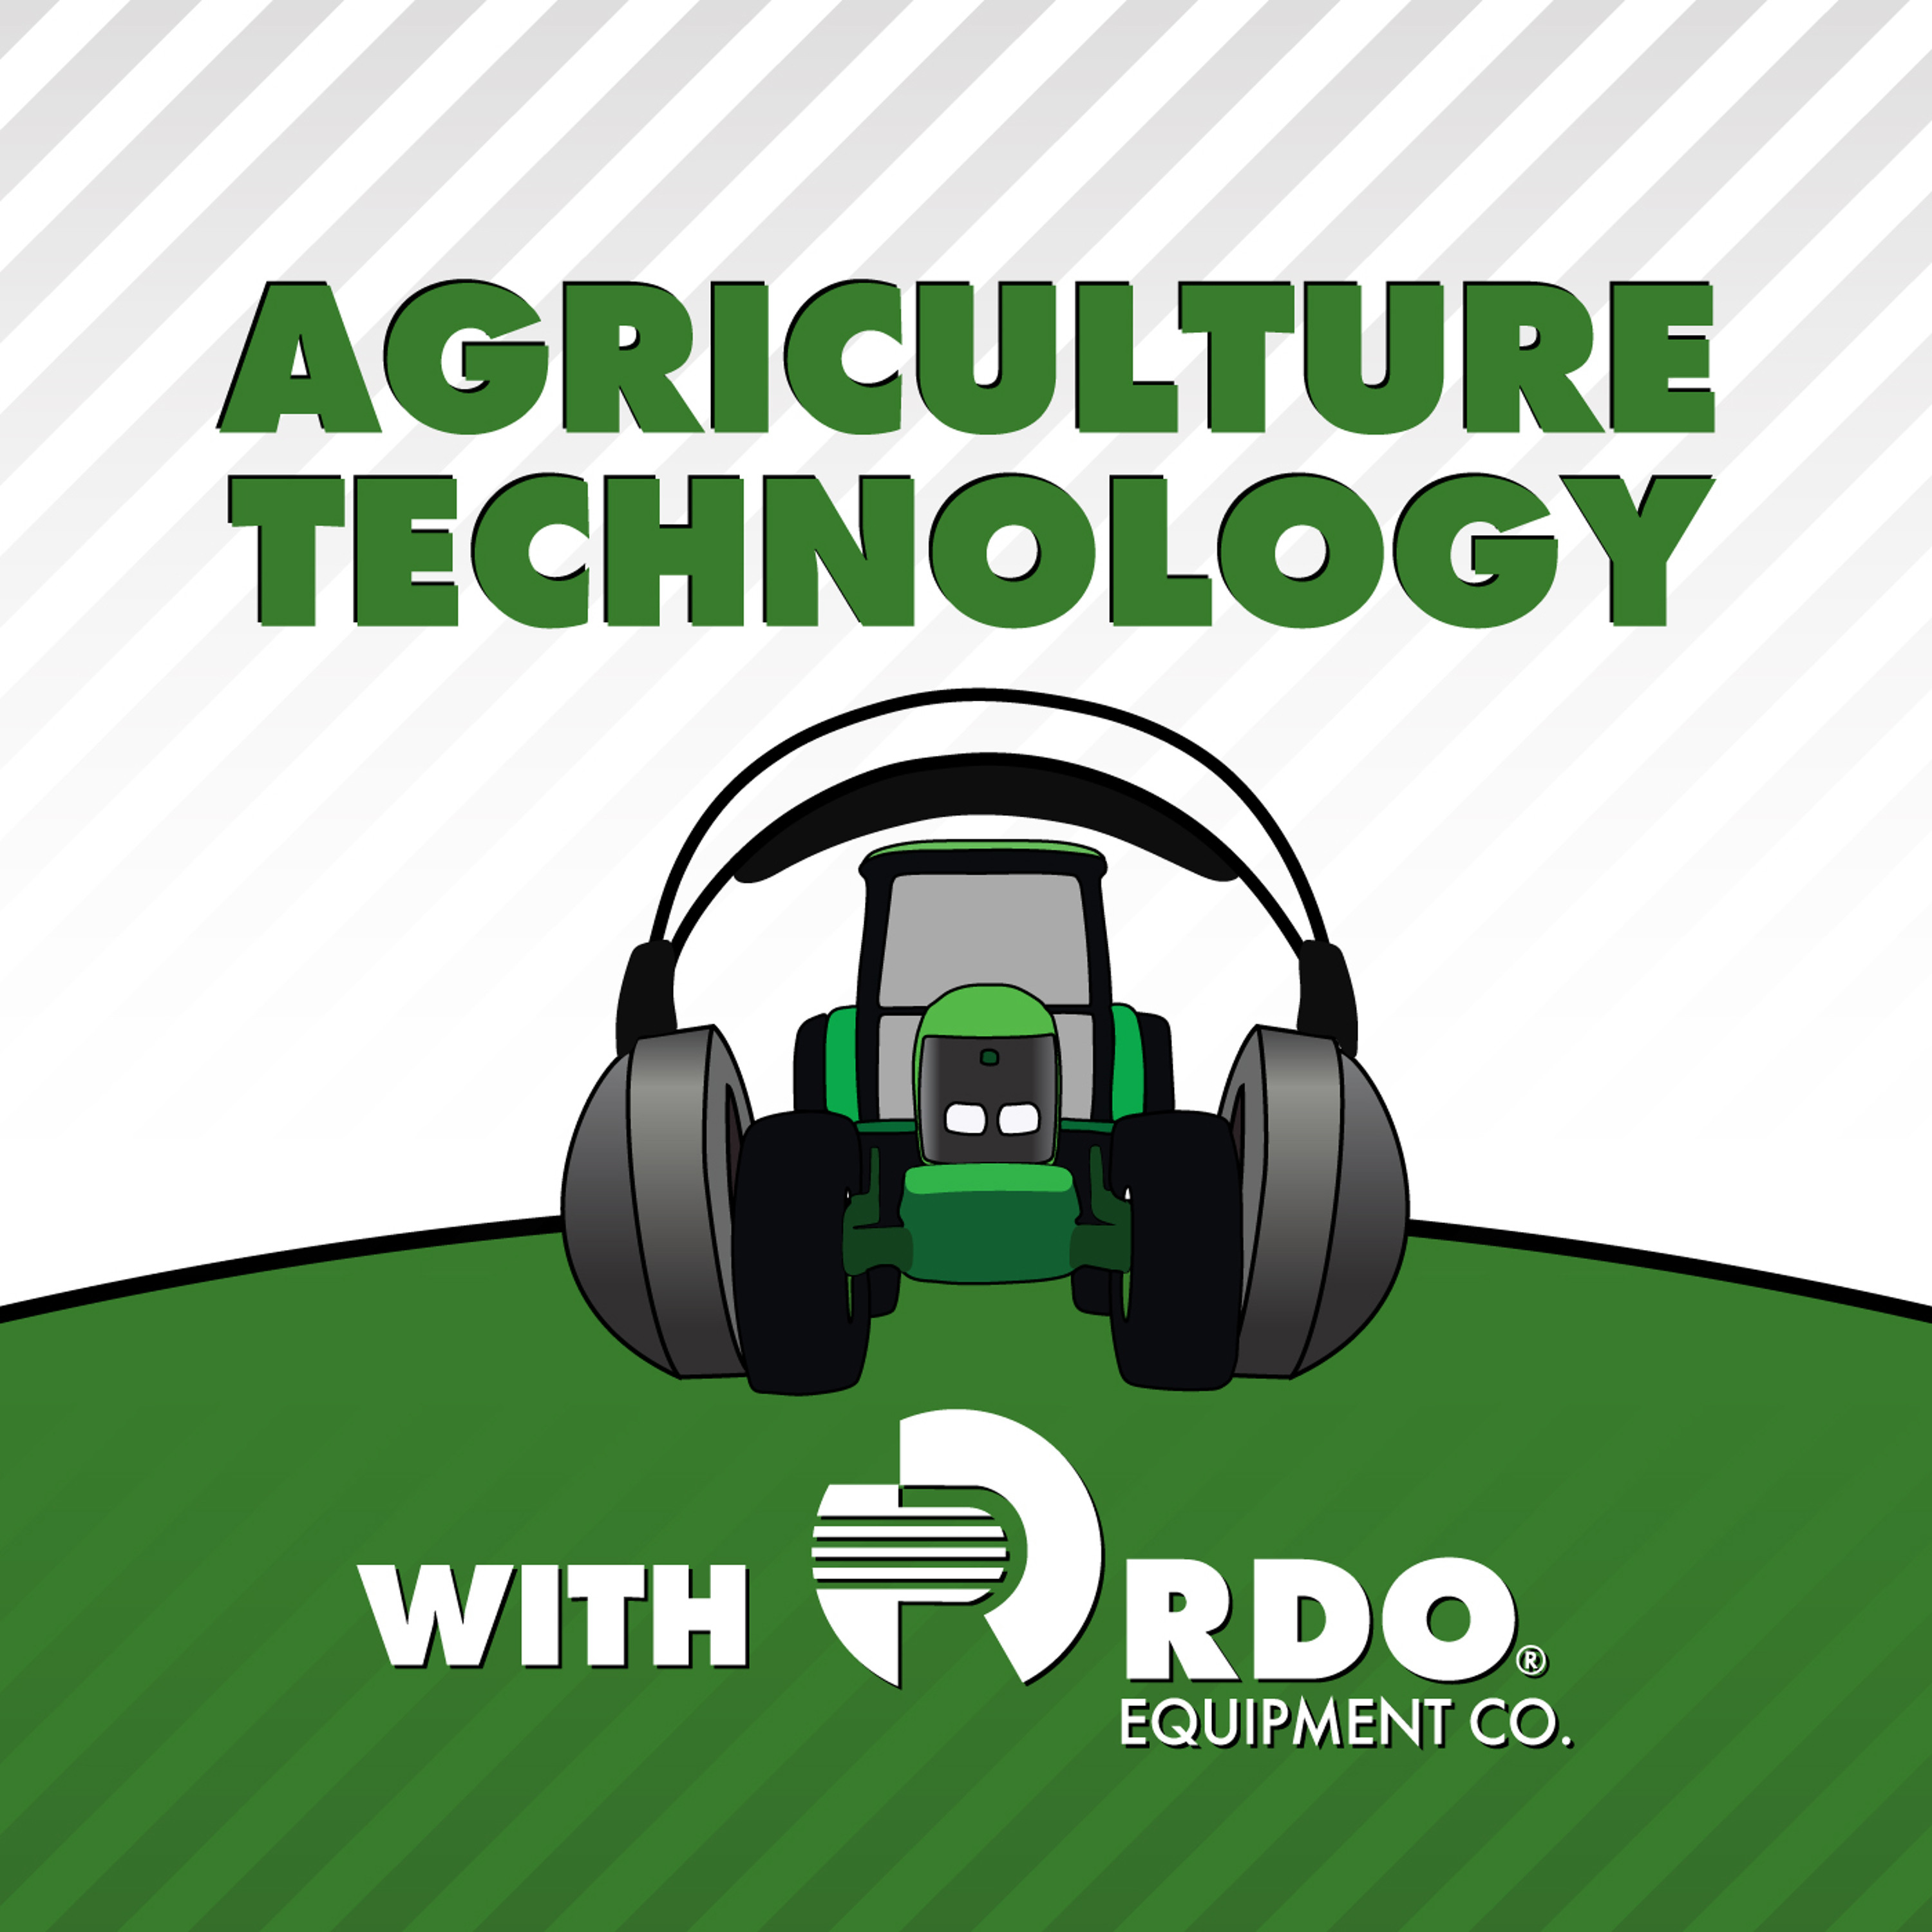 Ep. 24 Live from the Big Iron Farm Show!